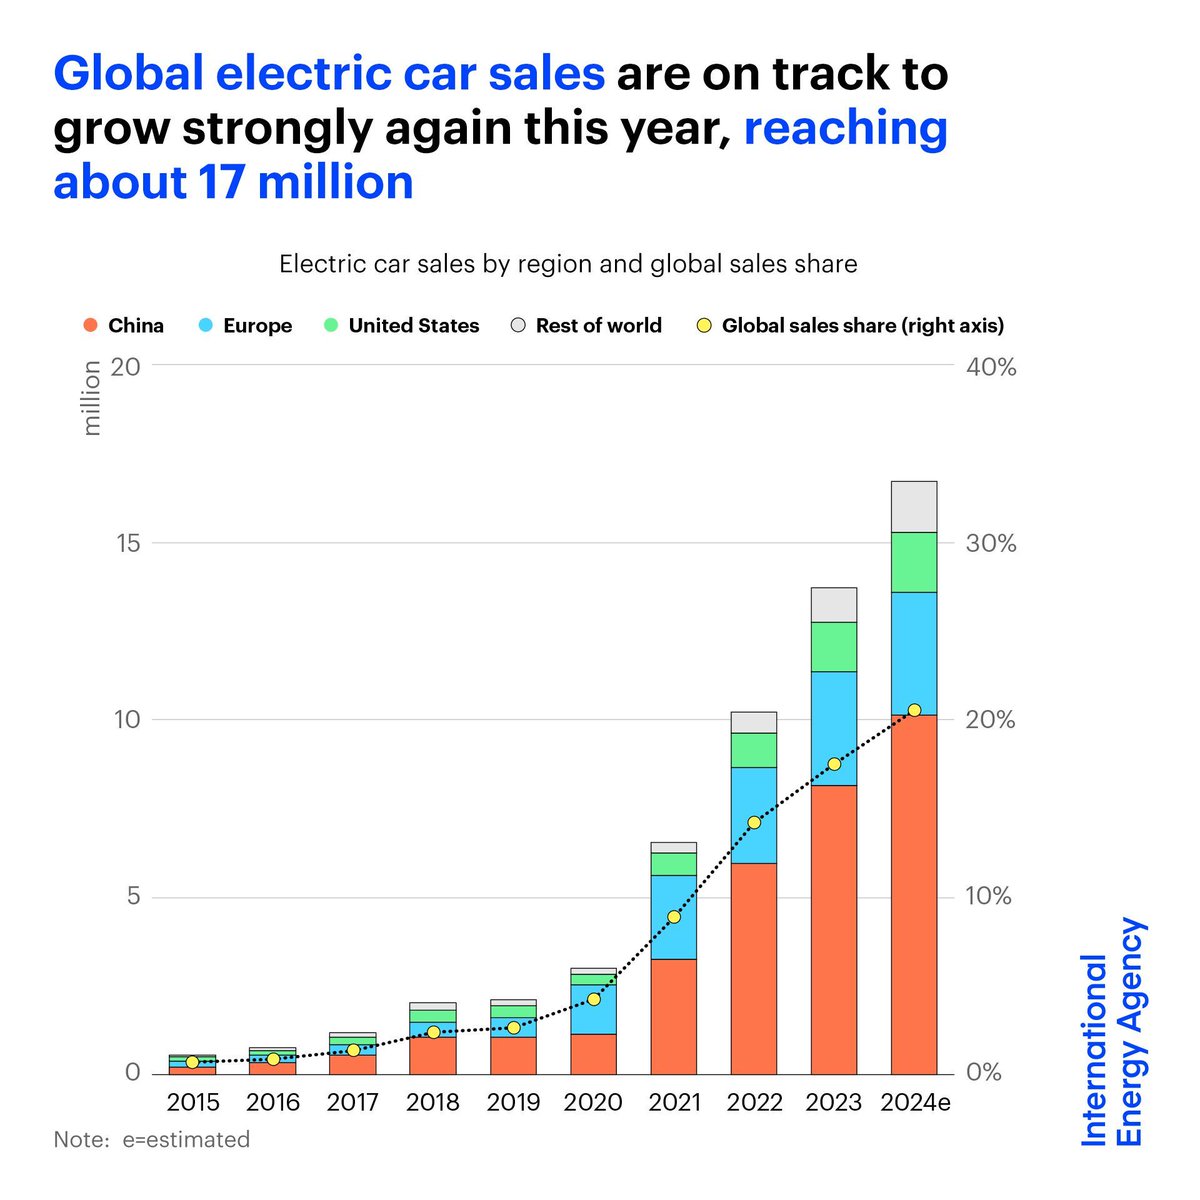 Global electric car sales are on track to grow strongly again this year, reaching about 17 million With more than 1 in 5 cars sold worldwide in 2024 set to be electric, the rise of EVs is transforming the auto industry & the energy sector Read more → iea.li/3wg0pYa